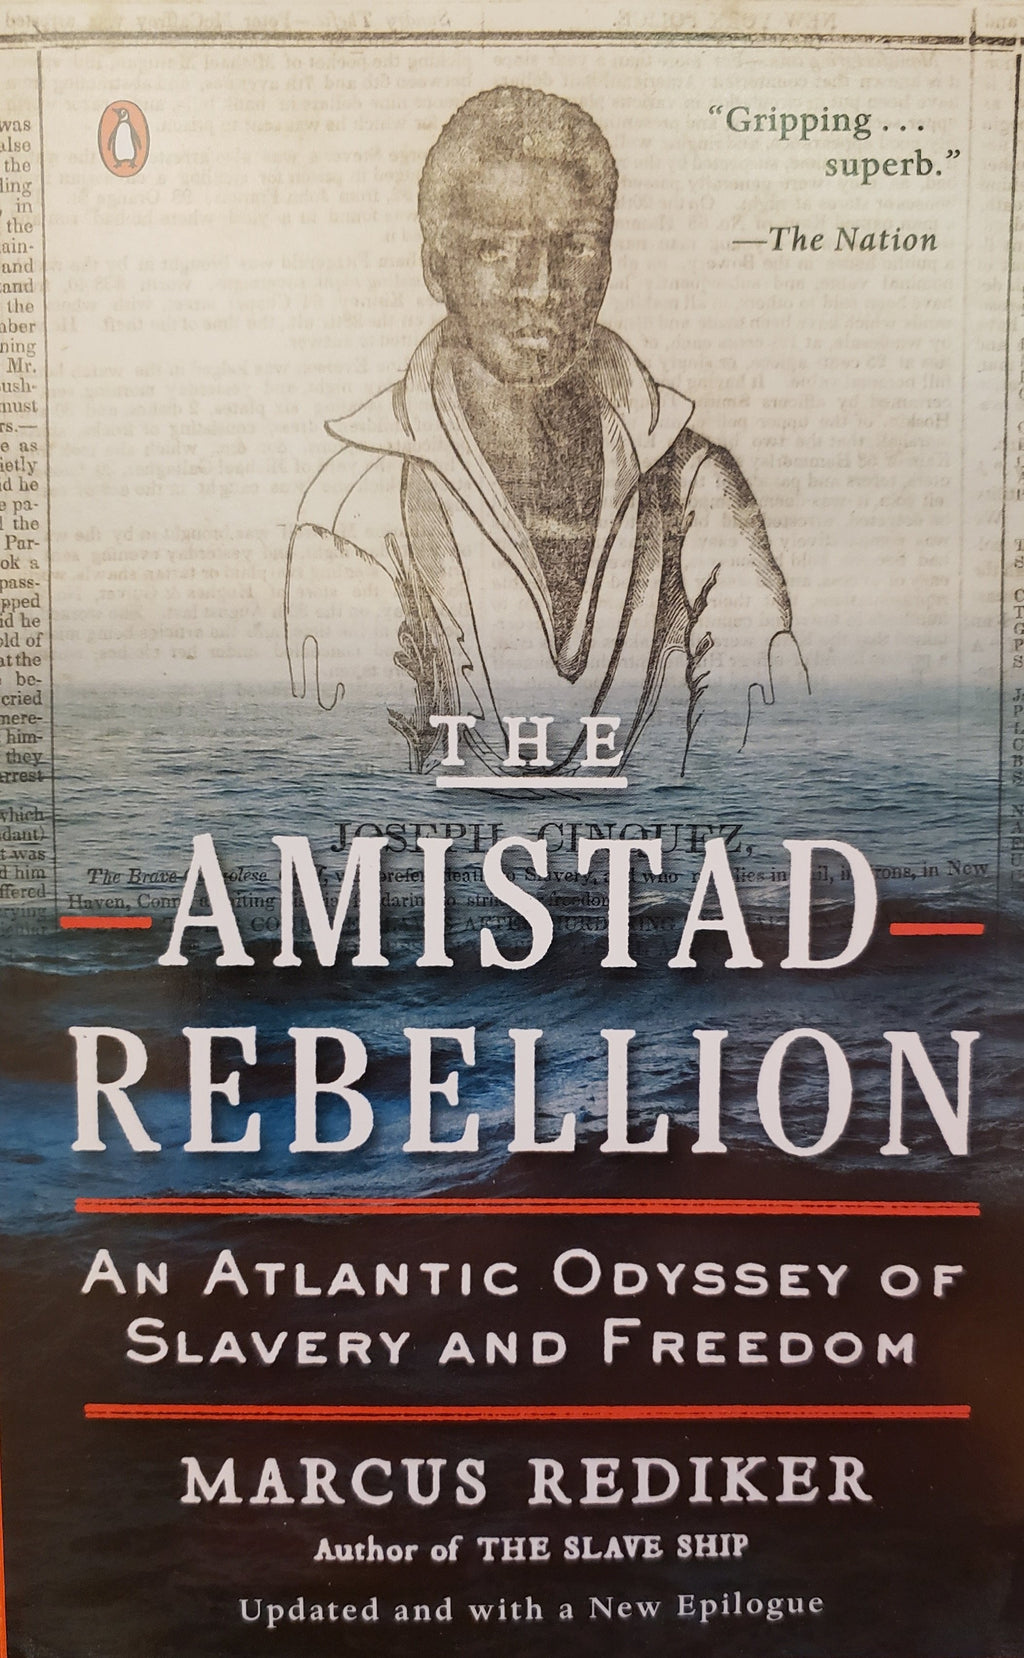 The Amistad Rebellion by Marcus Rediker